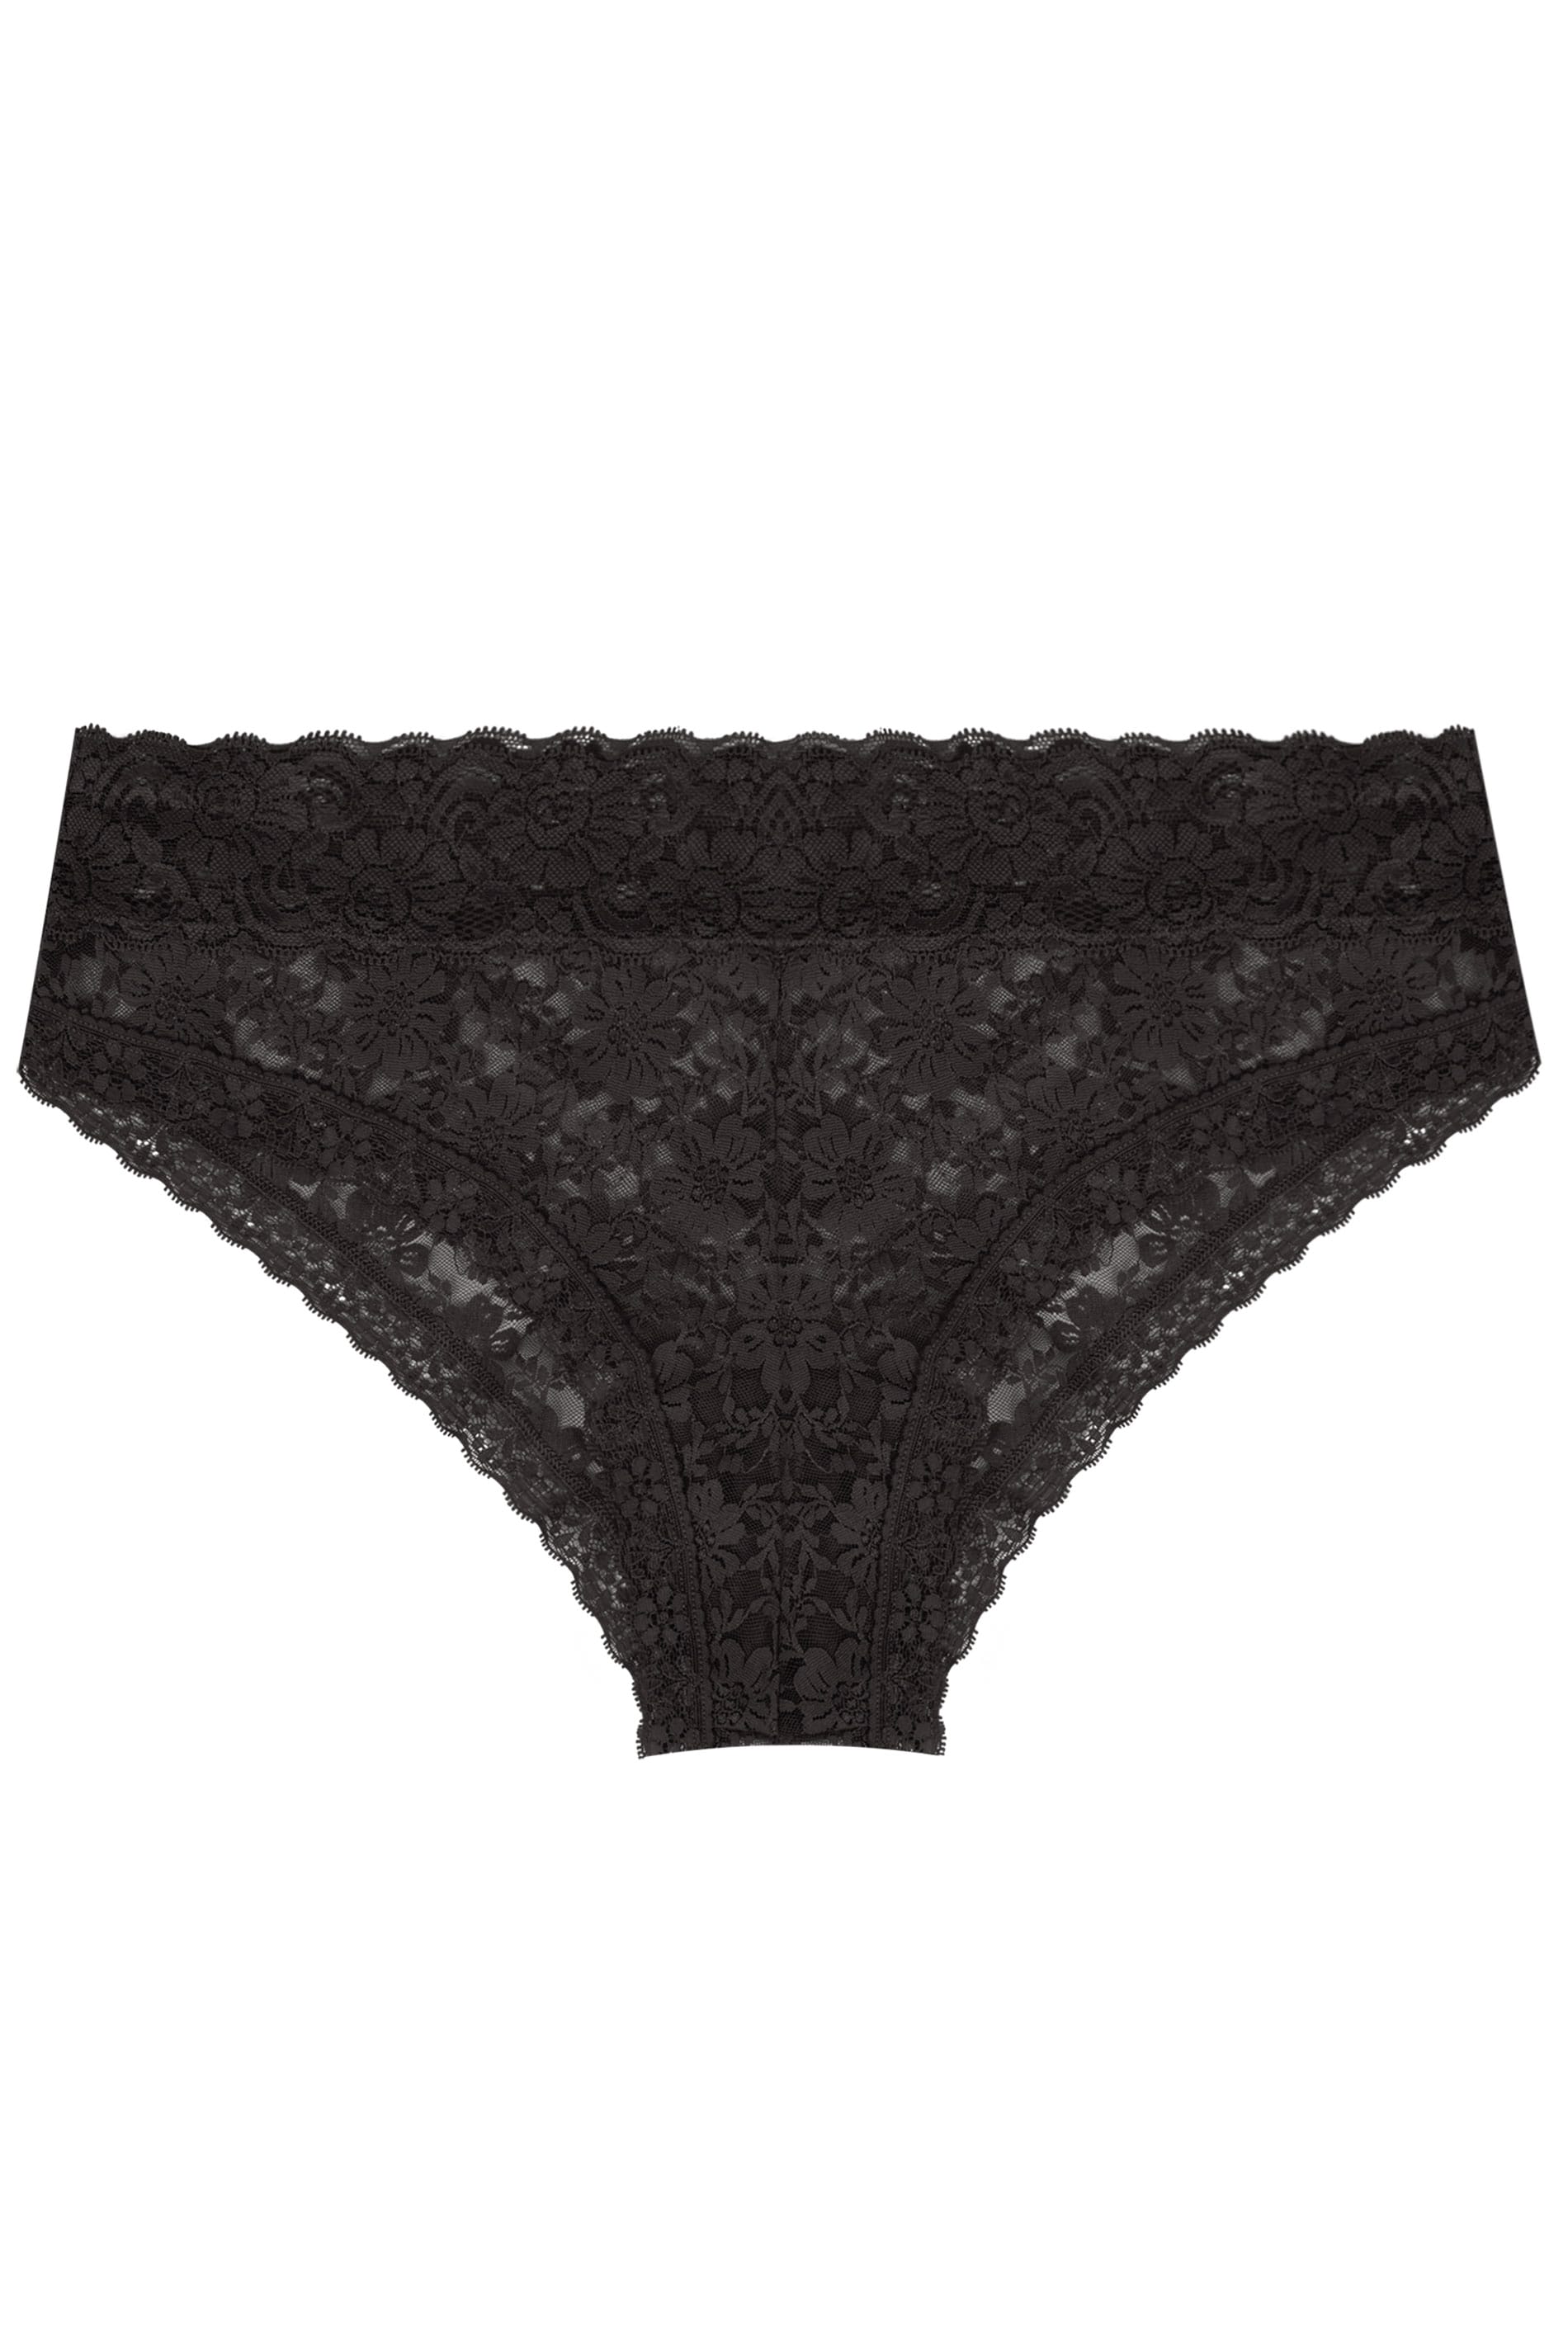 3 PACK Black & Pink Lace Low Rise Brazillian Knickers